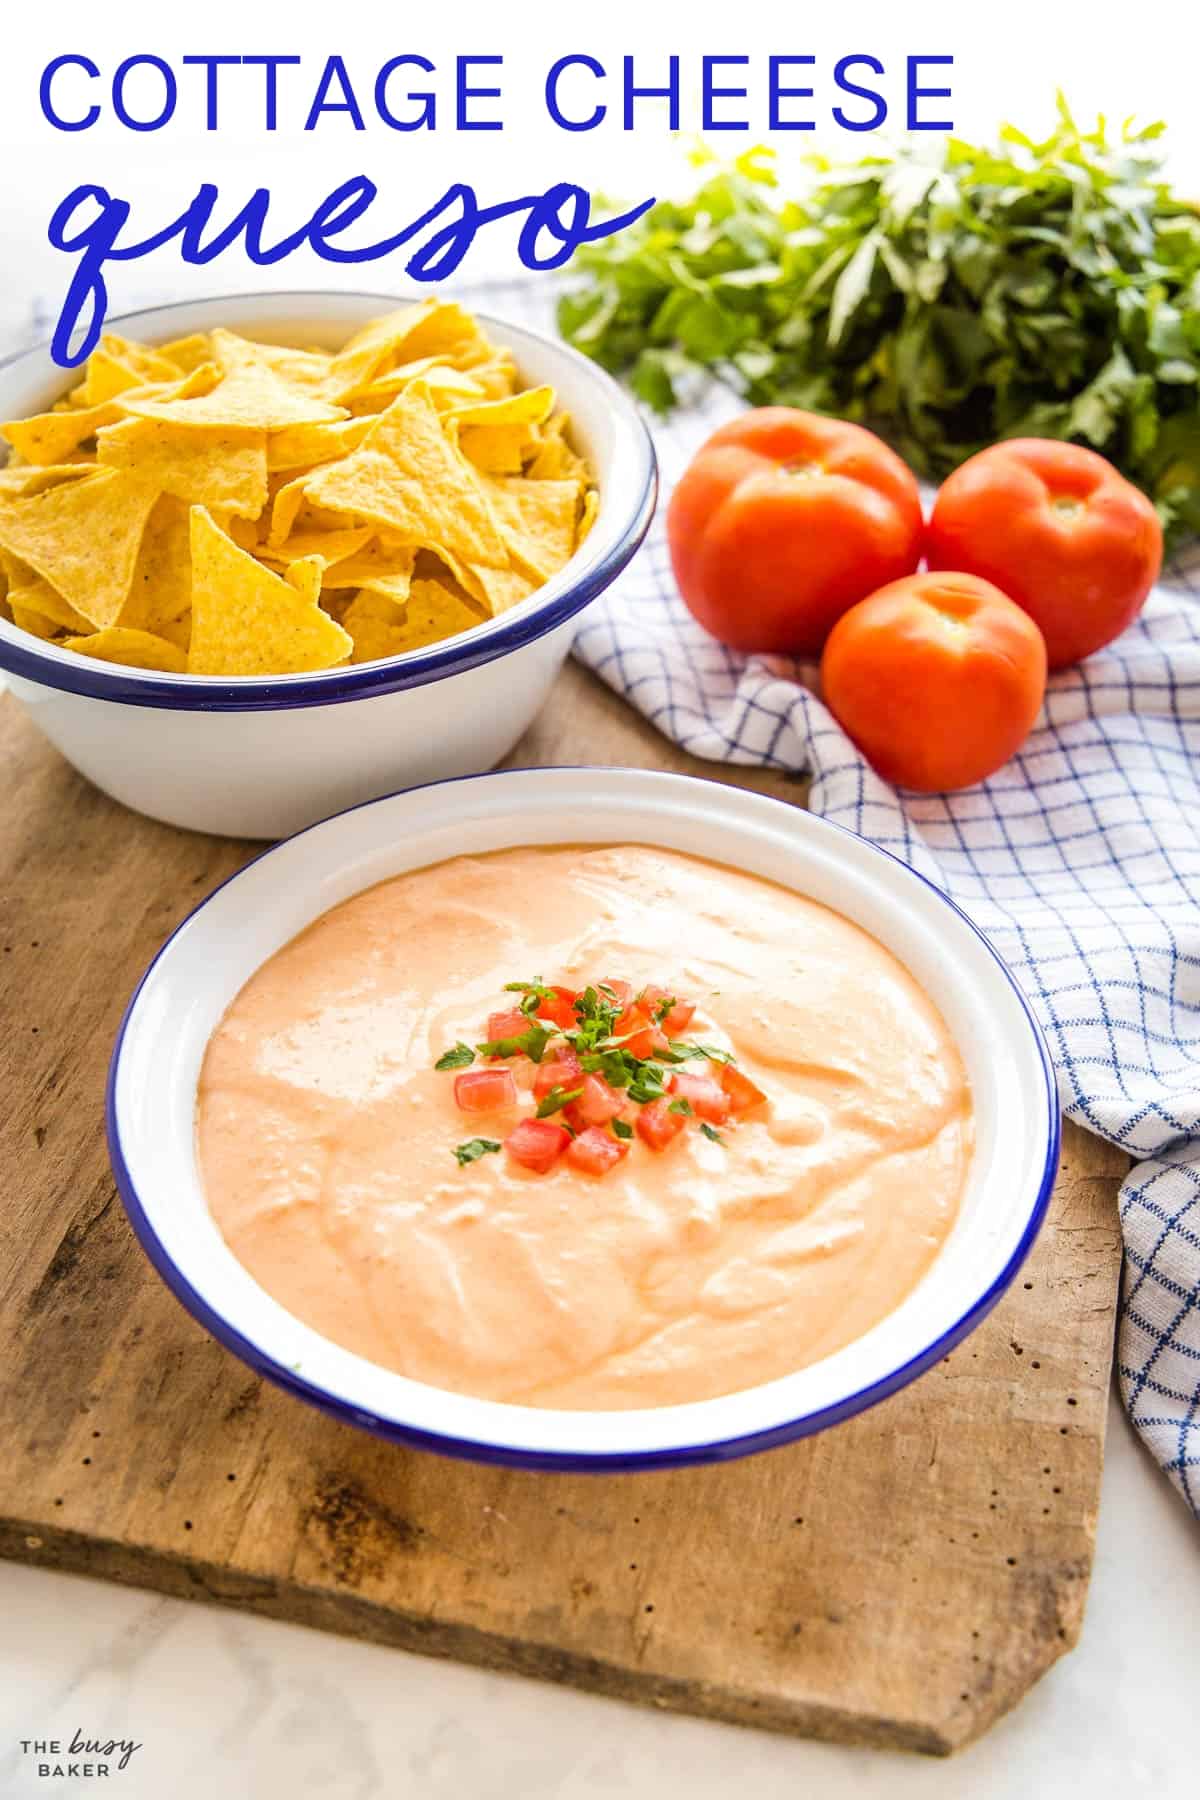 COTTAGE CHEESE queso title